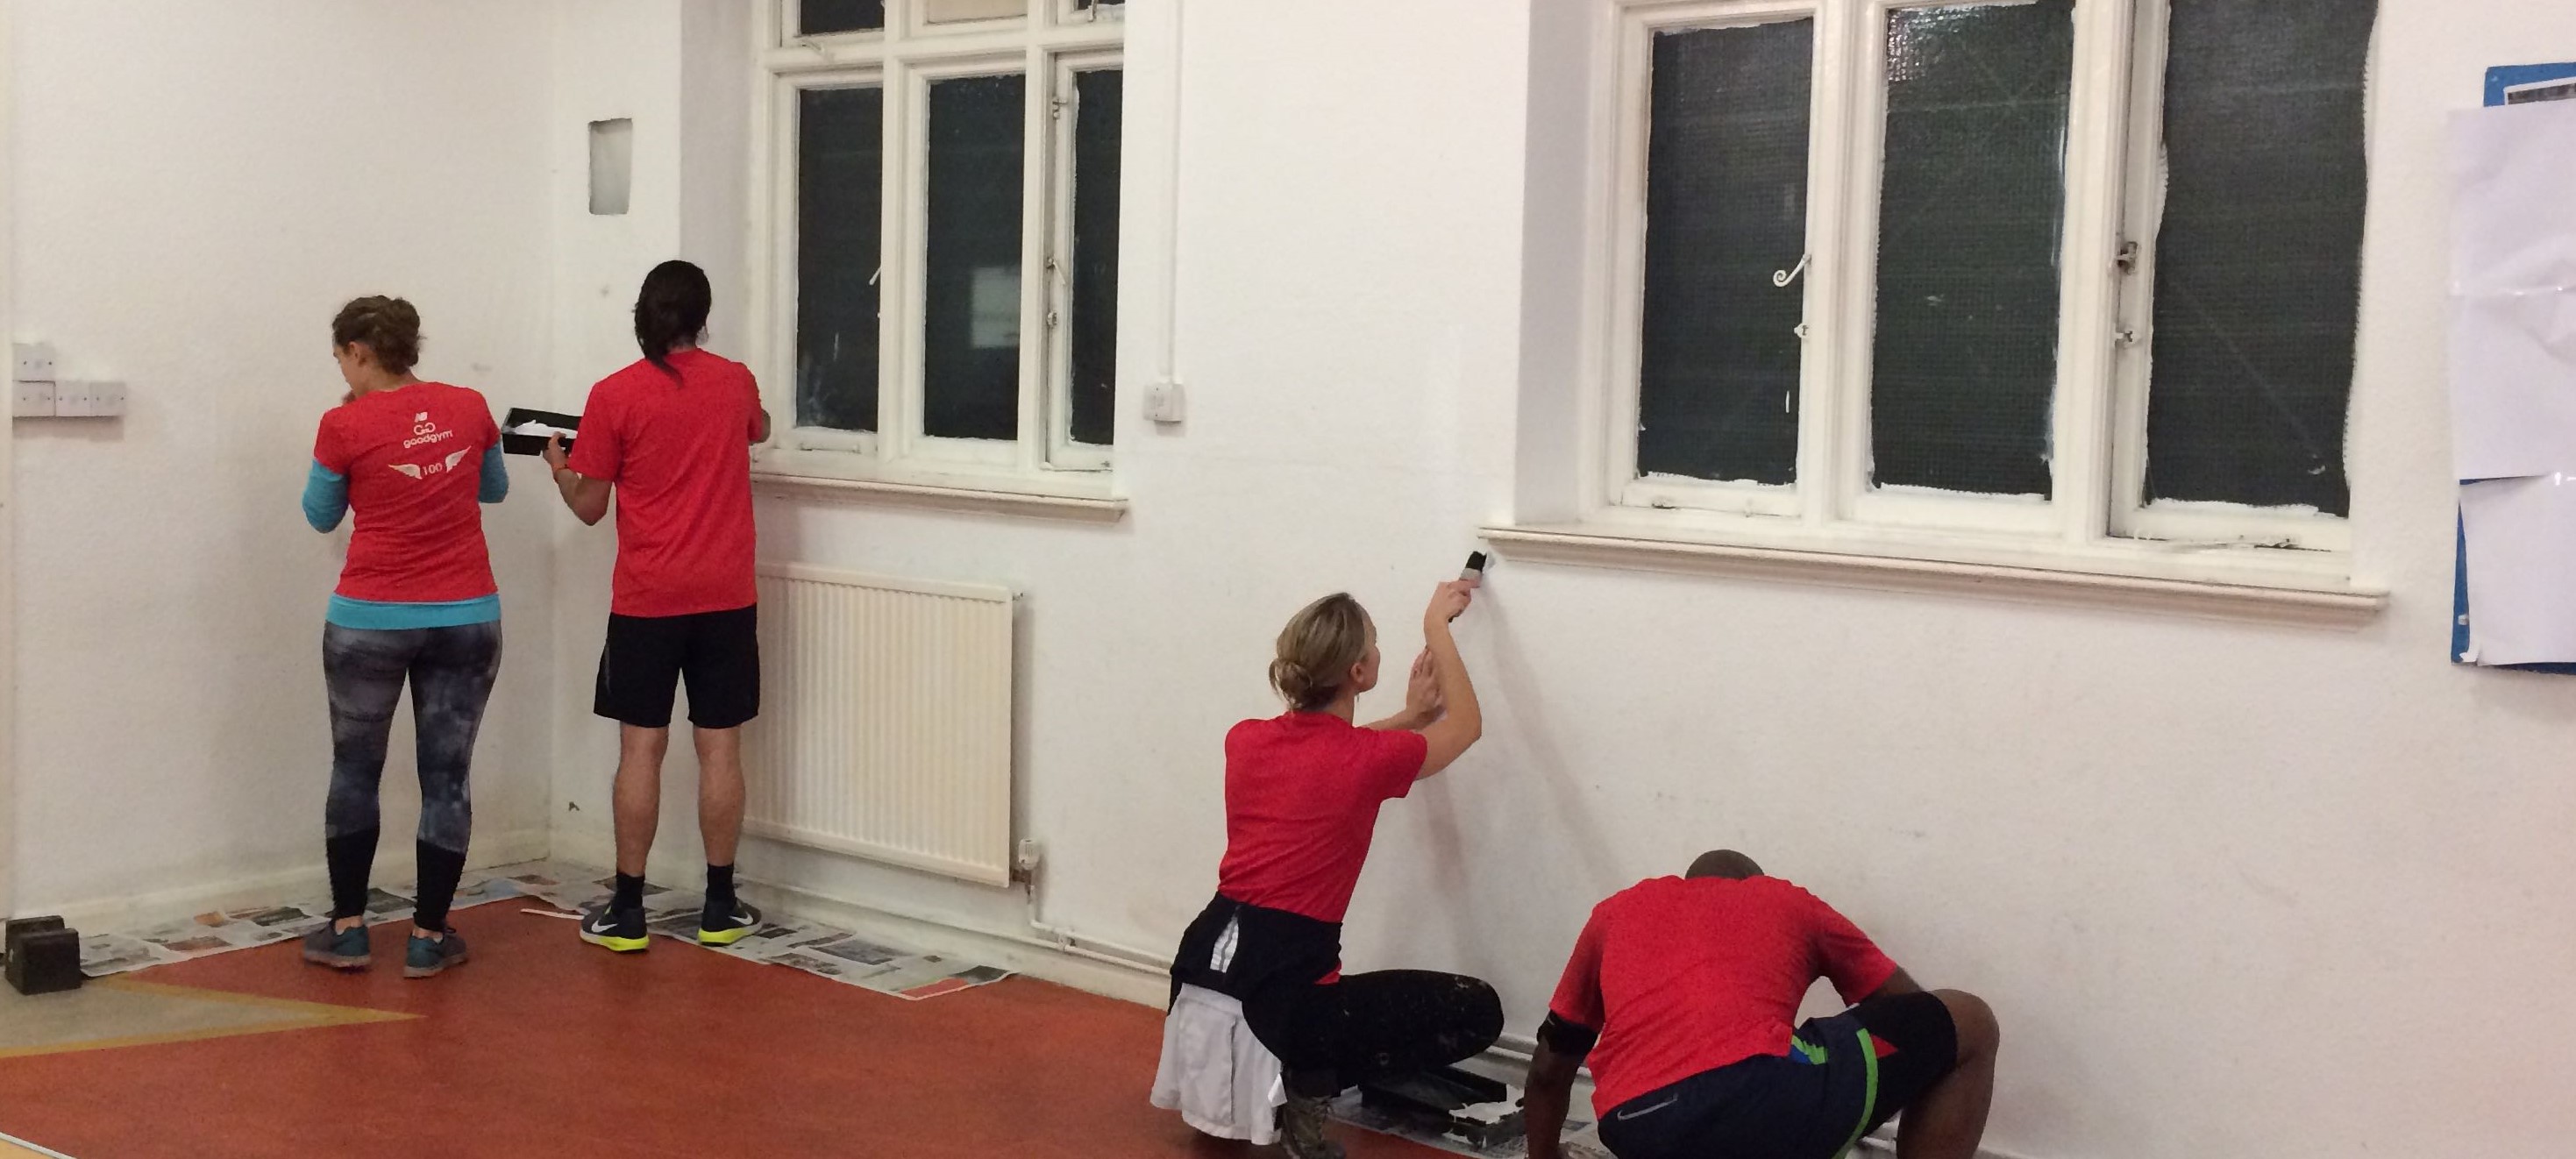 volunteers red shirts painting hall